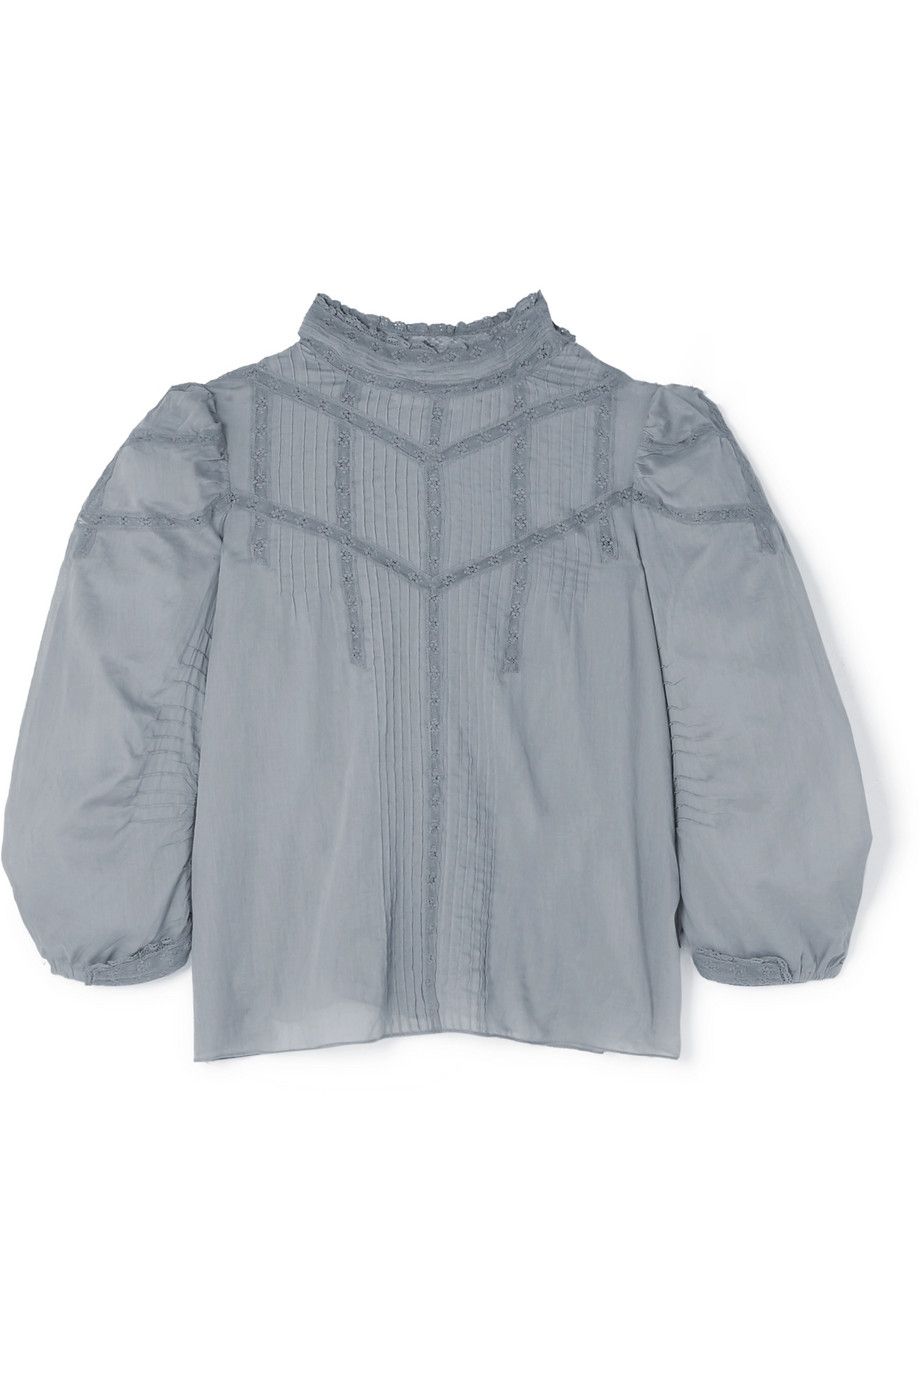 Albertine lace-trimmed pintucked ramie blouse